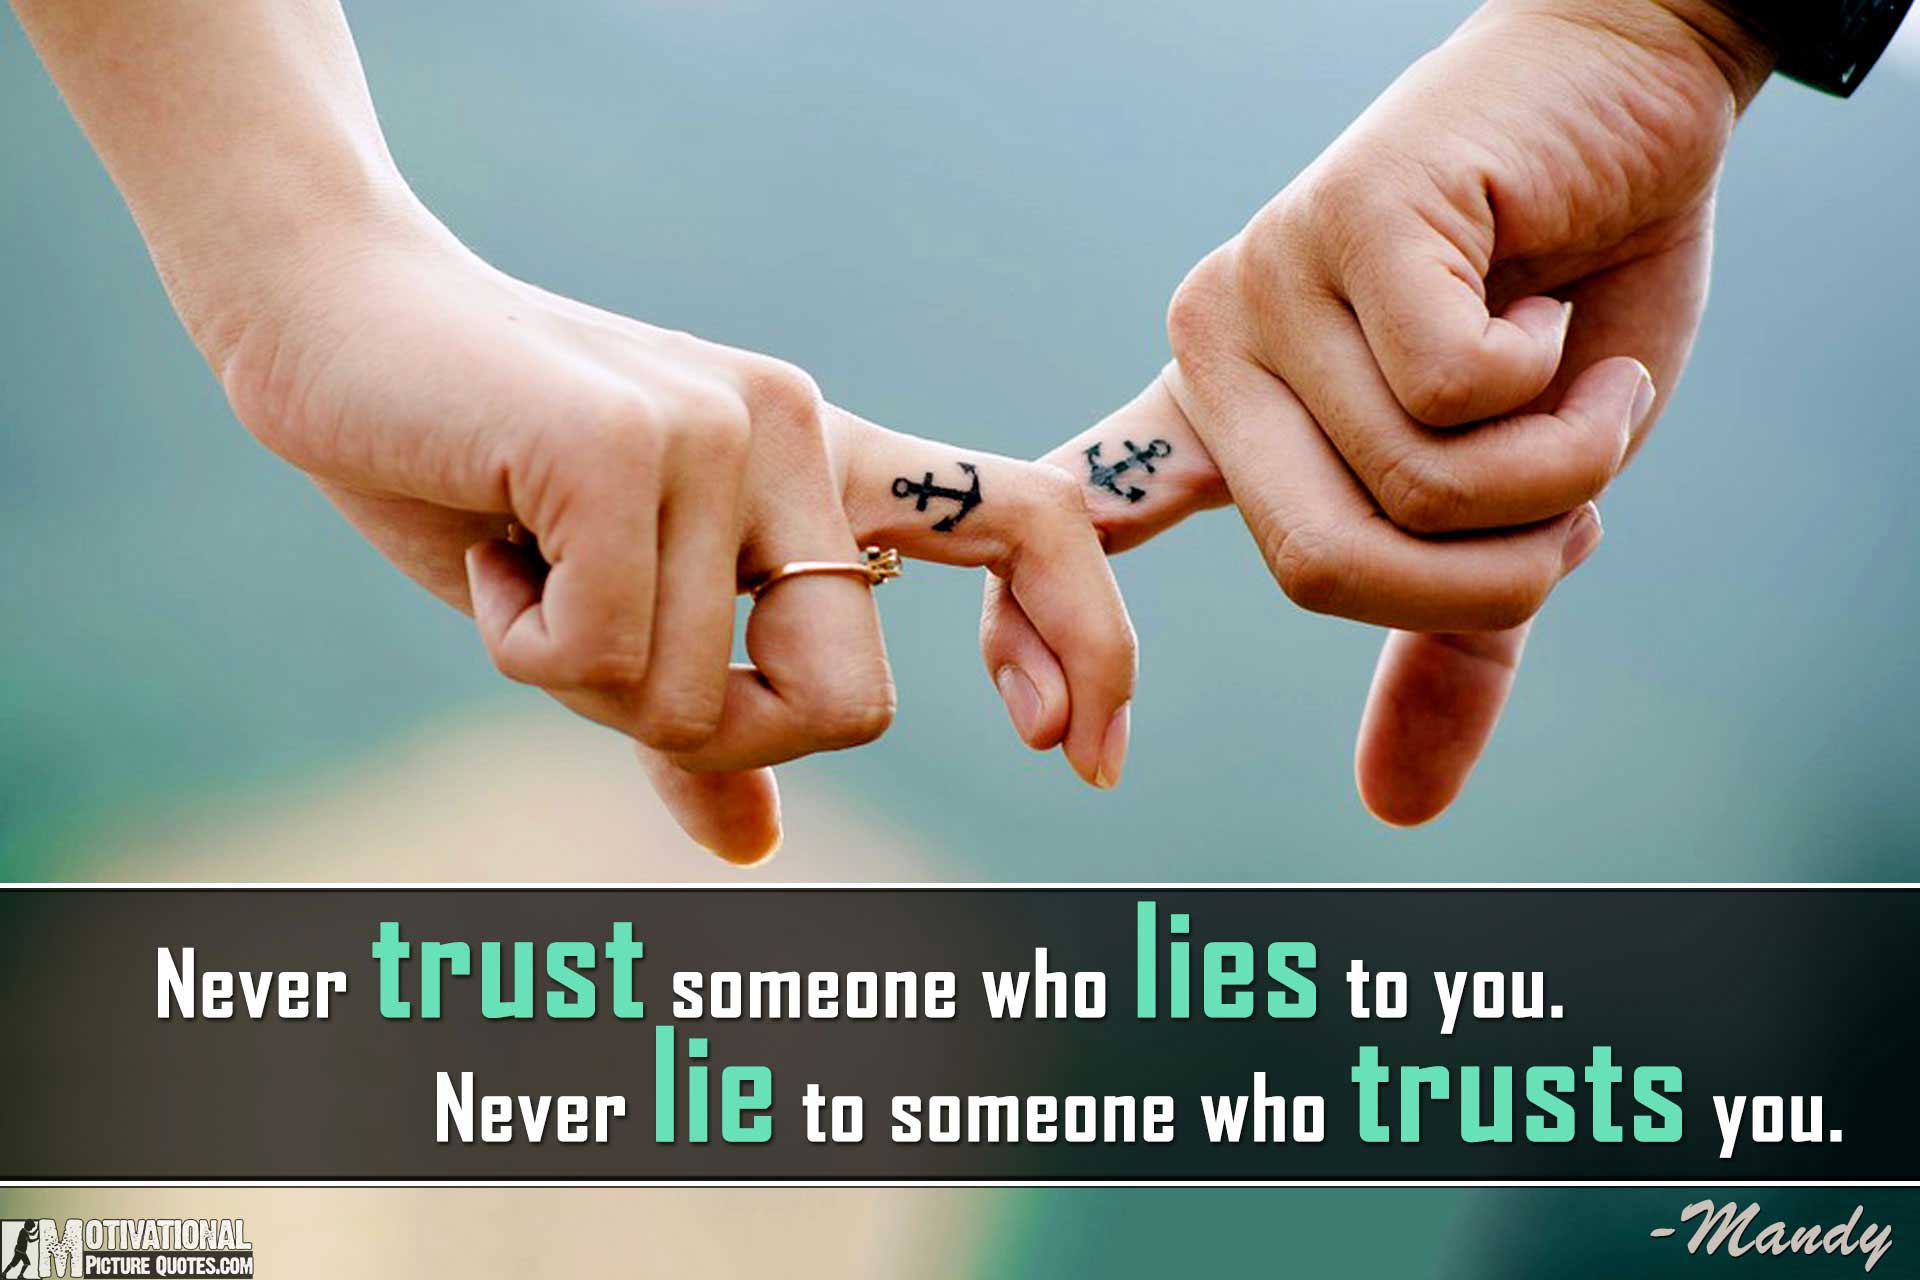 quote on trust by Mandy